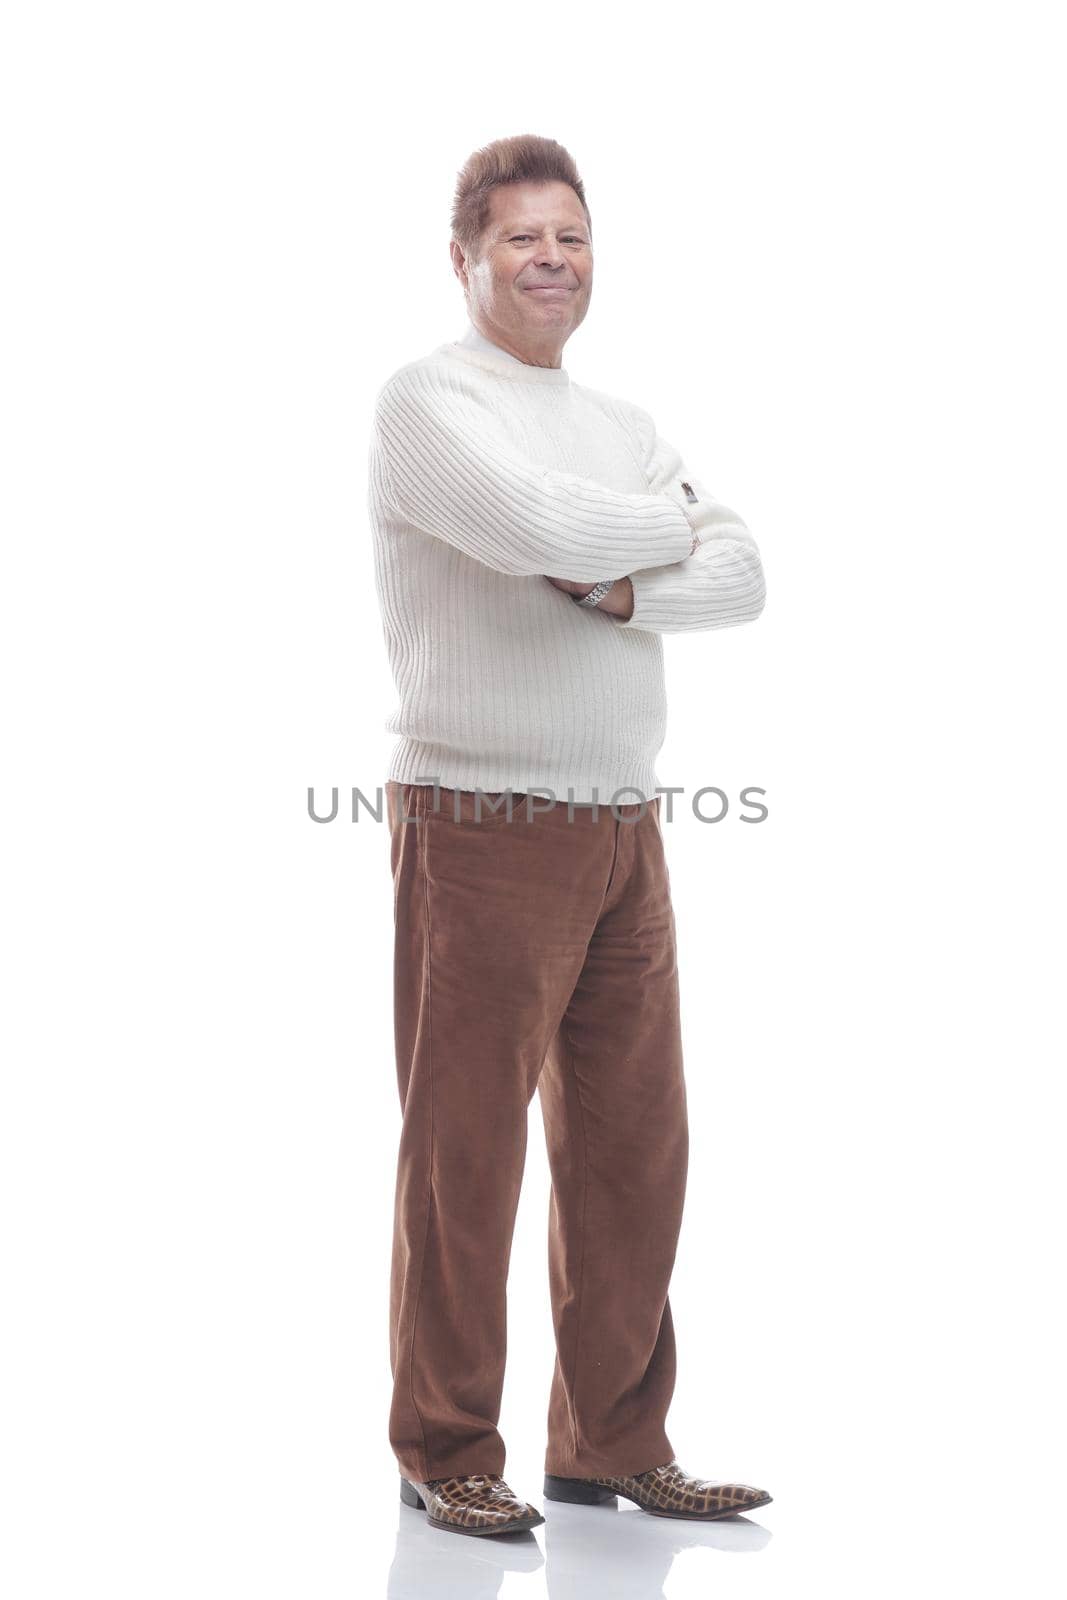 in full growth. confident adult man in casual clothes. isolated on a white